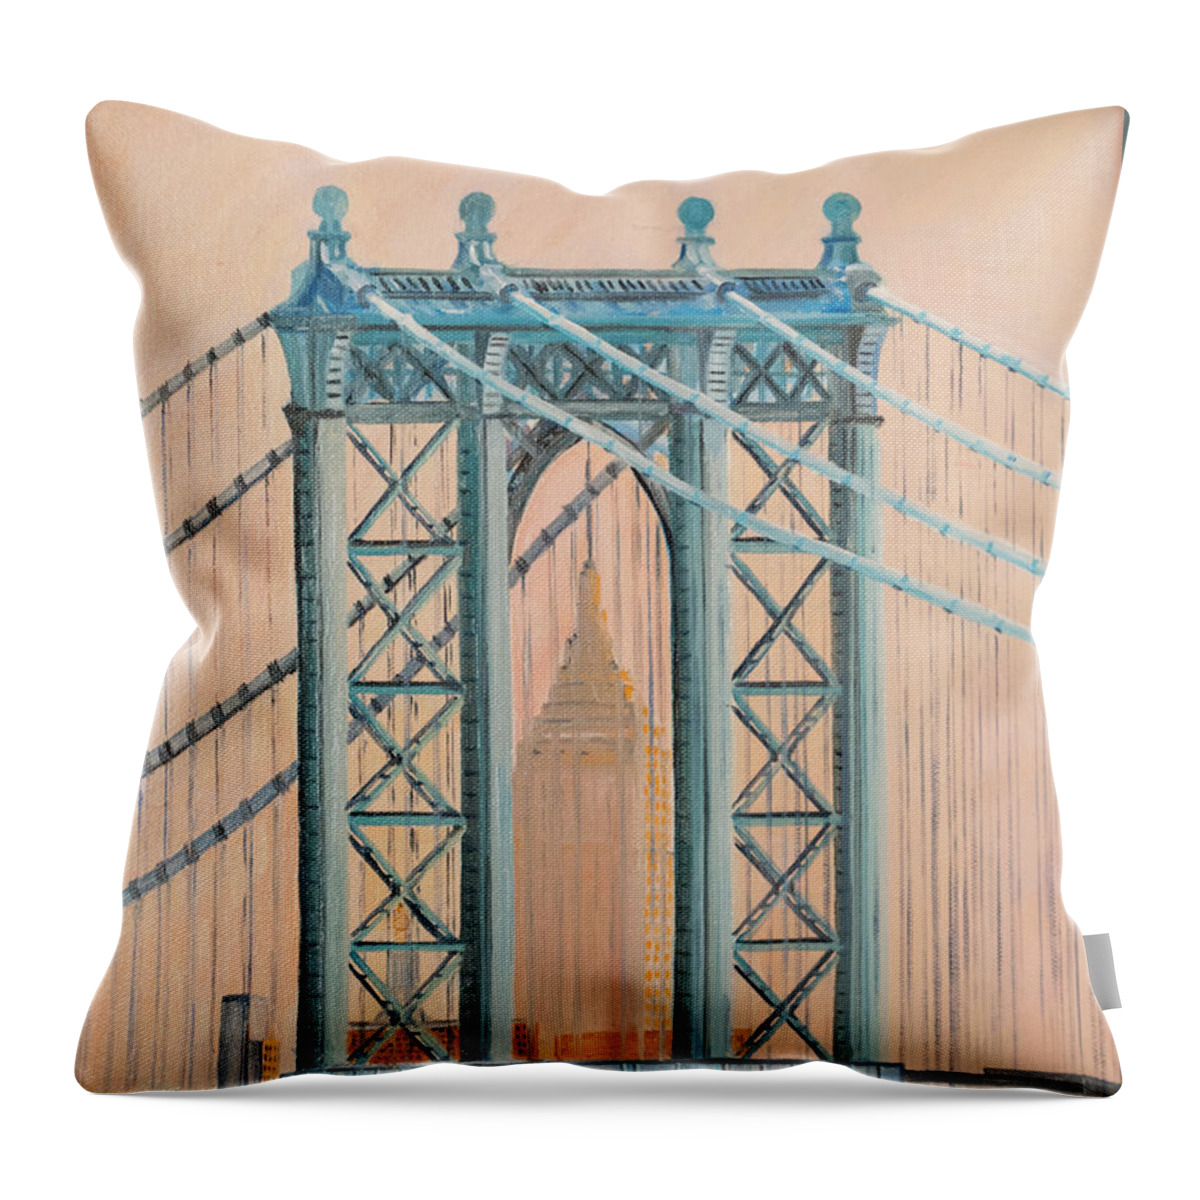 New York Throw Pillow featuring the painting Empire State Building by Jean-Pierre Ducondi